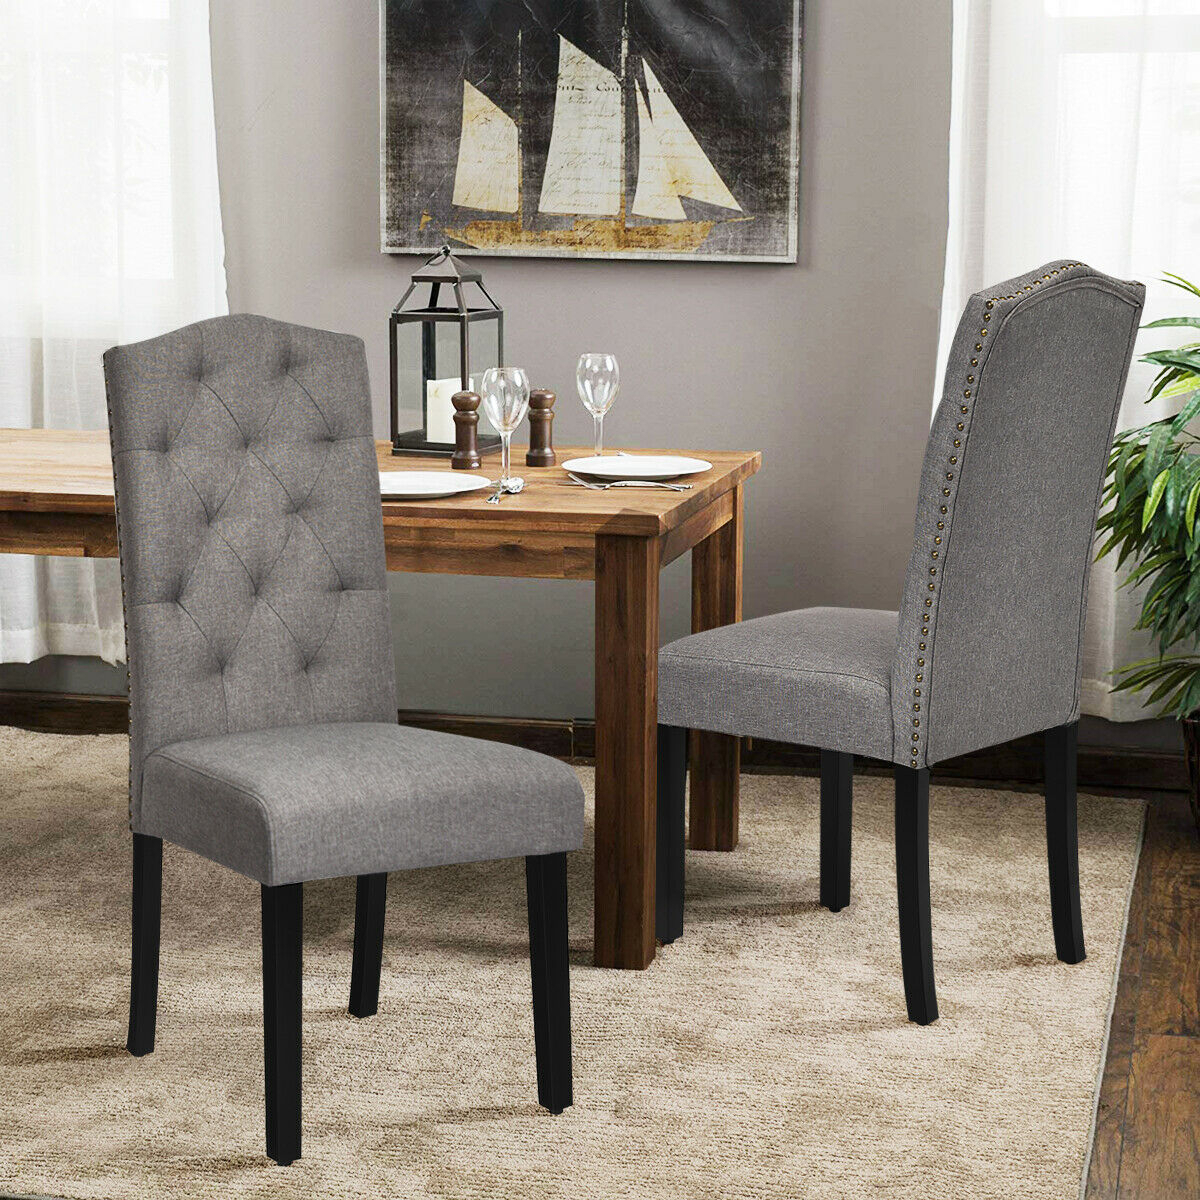 Set Of 4 Tufted Dining Chair Upholstered W/ Nailhead Trim & Rubber Wooden Legs